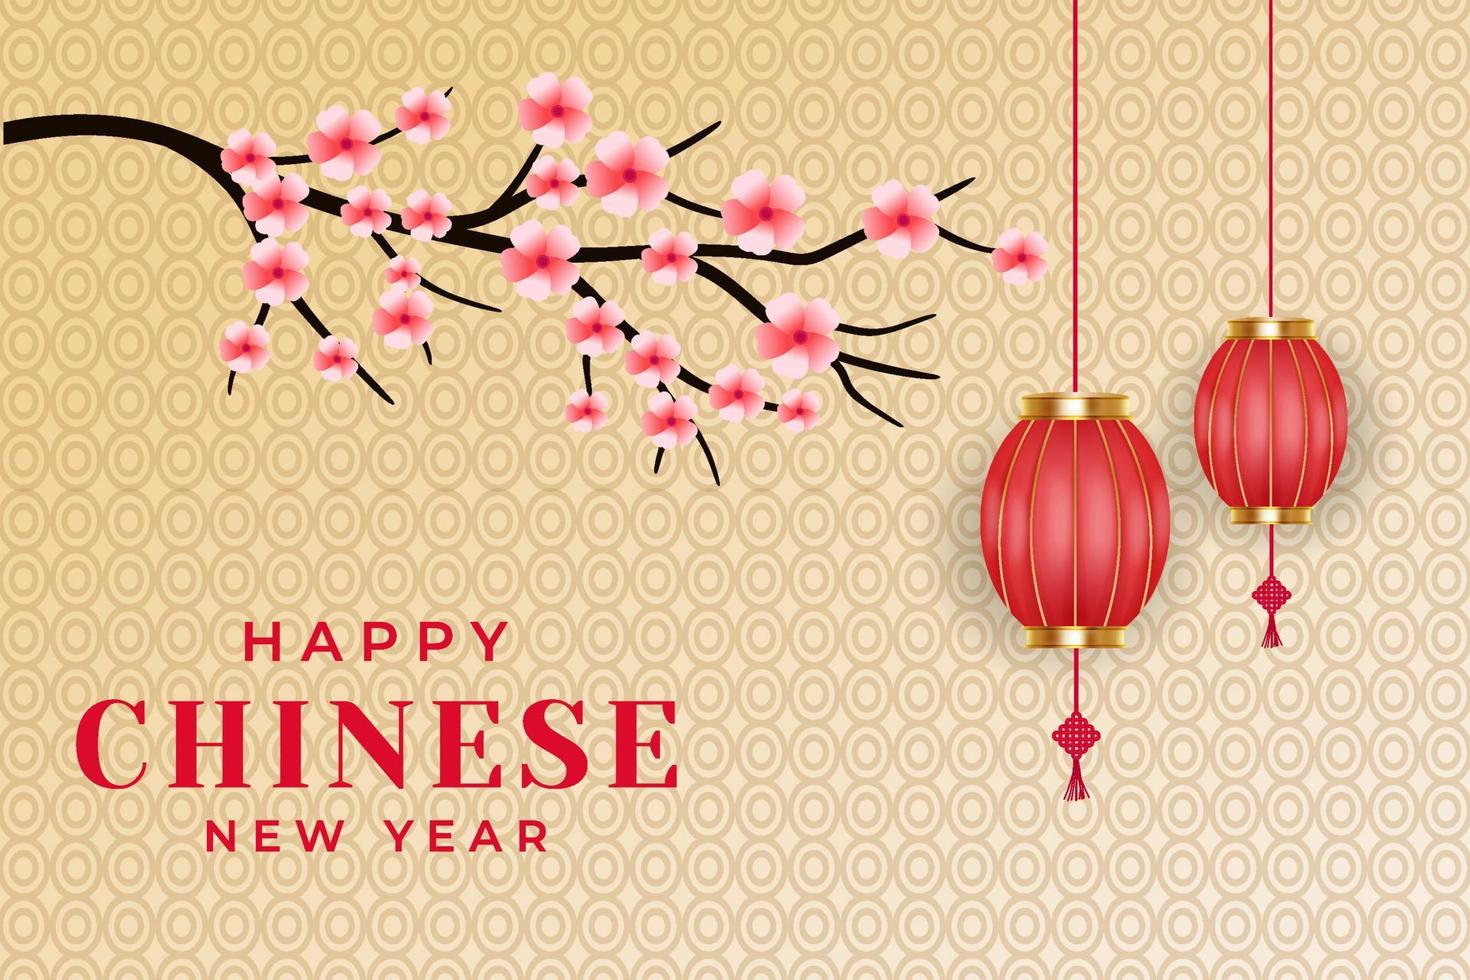 happy chinese new year background with sakura flower and lanterns. chinese new year vector design